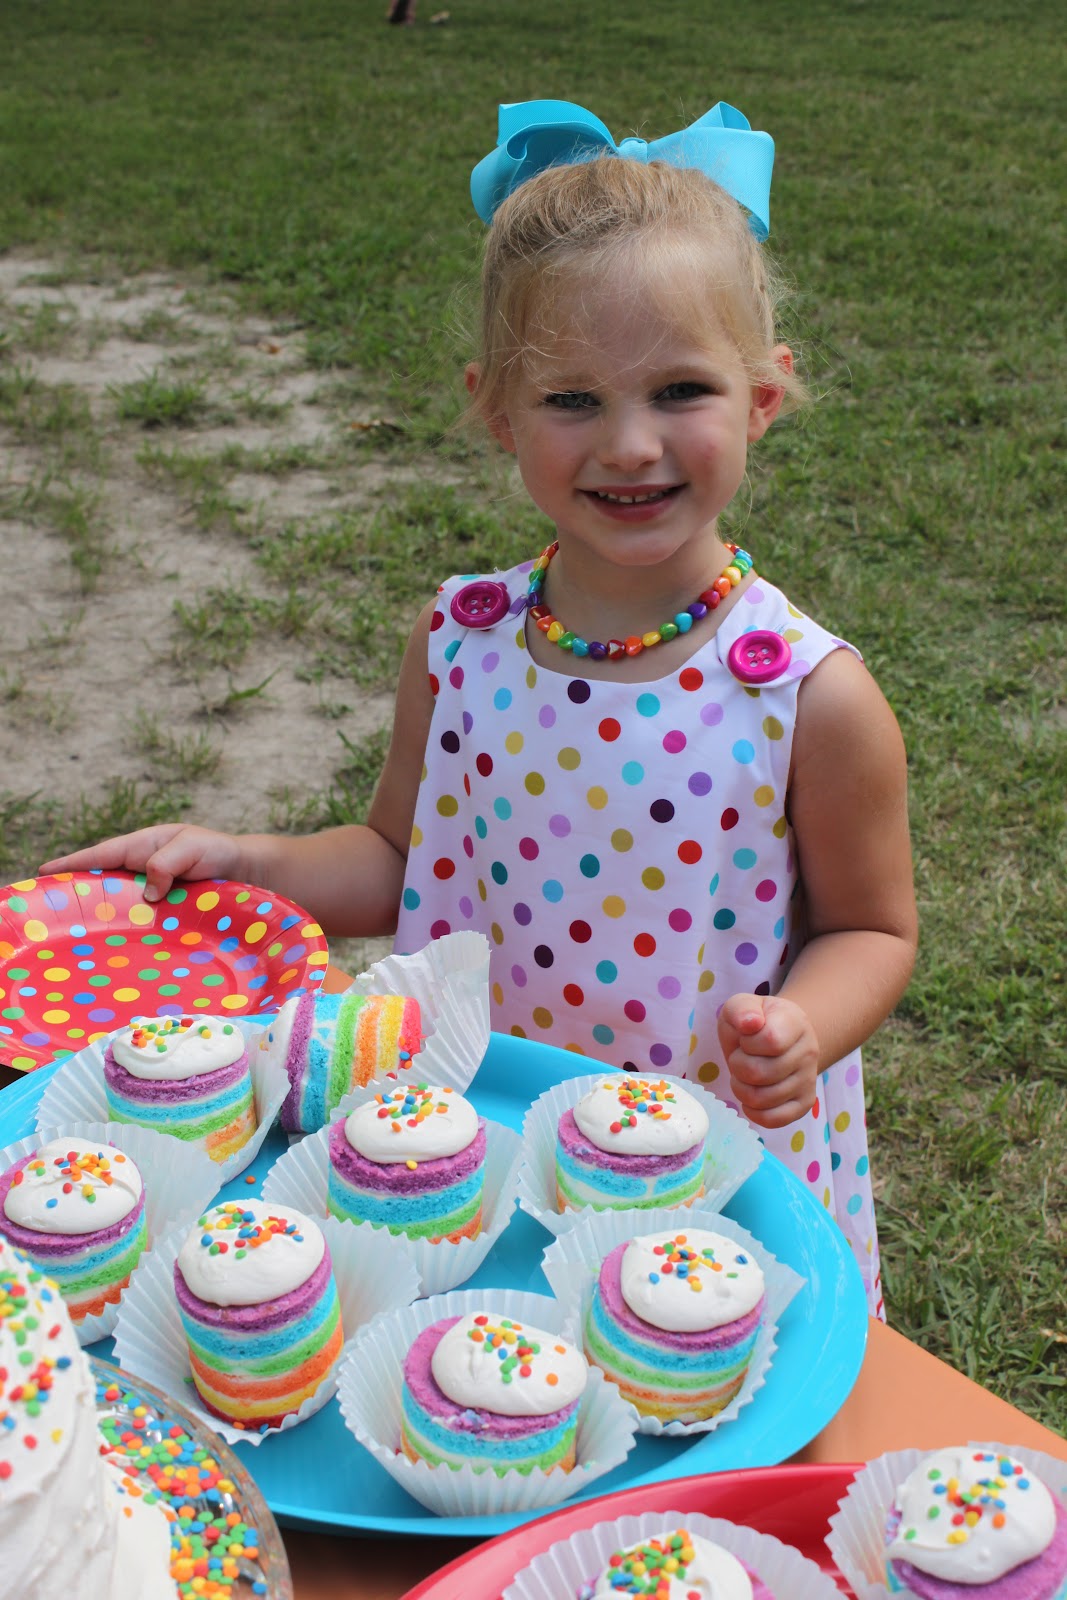 The Buford Family: Happy 4th birthday to one special little girl